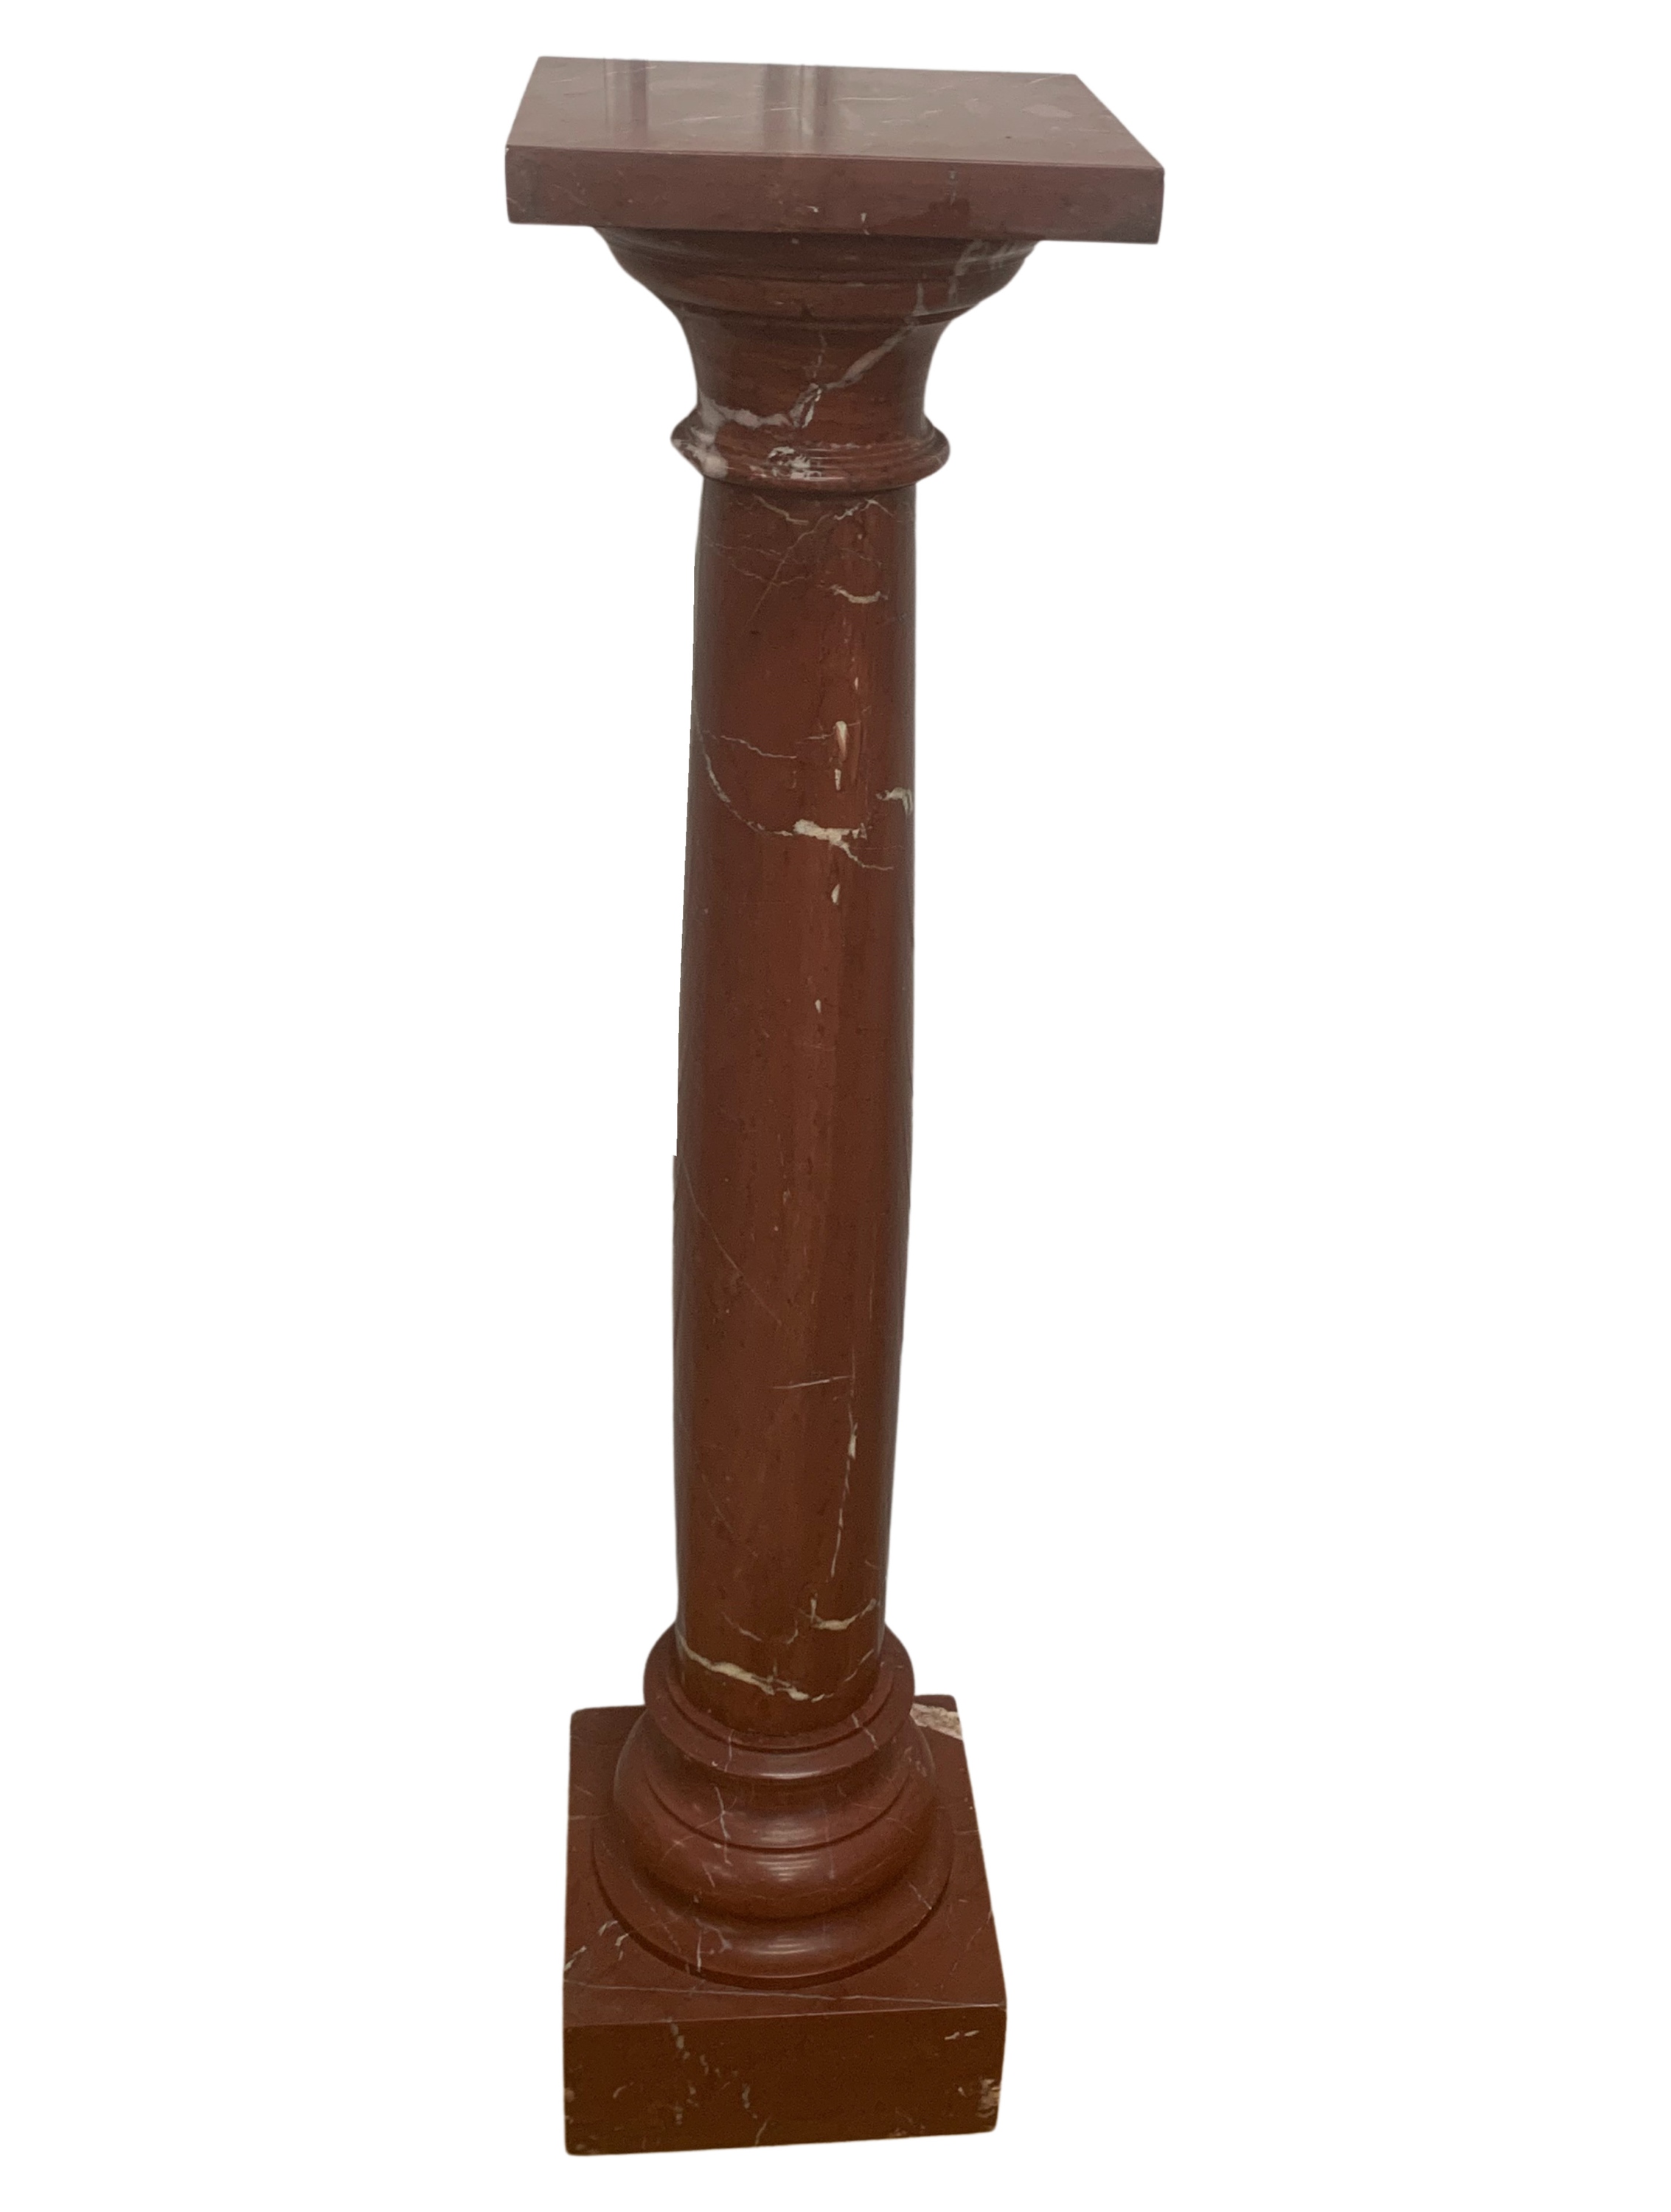 49" FRENCH ROUGE MARBLE PEDESTAL